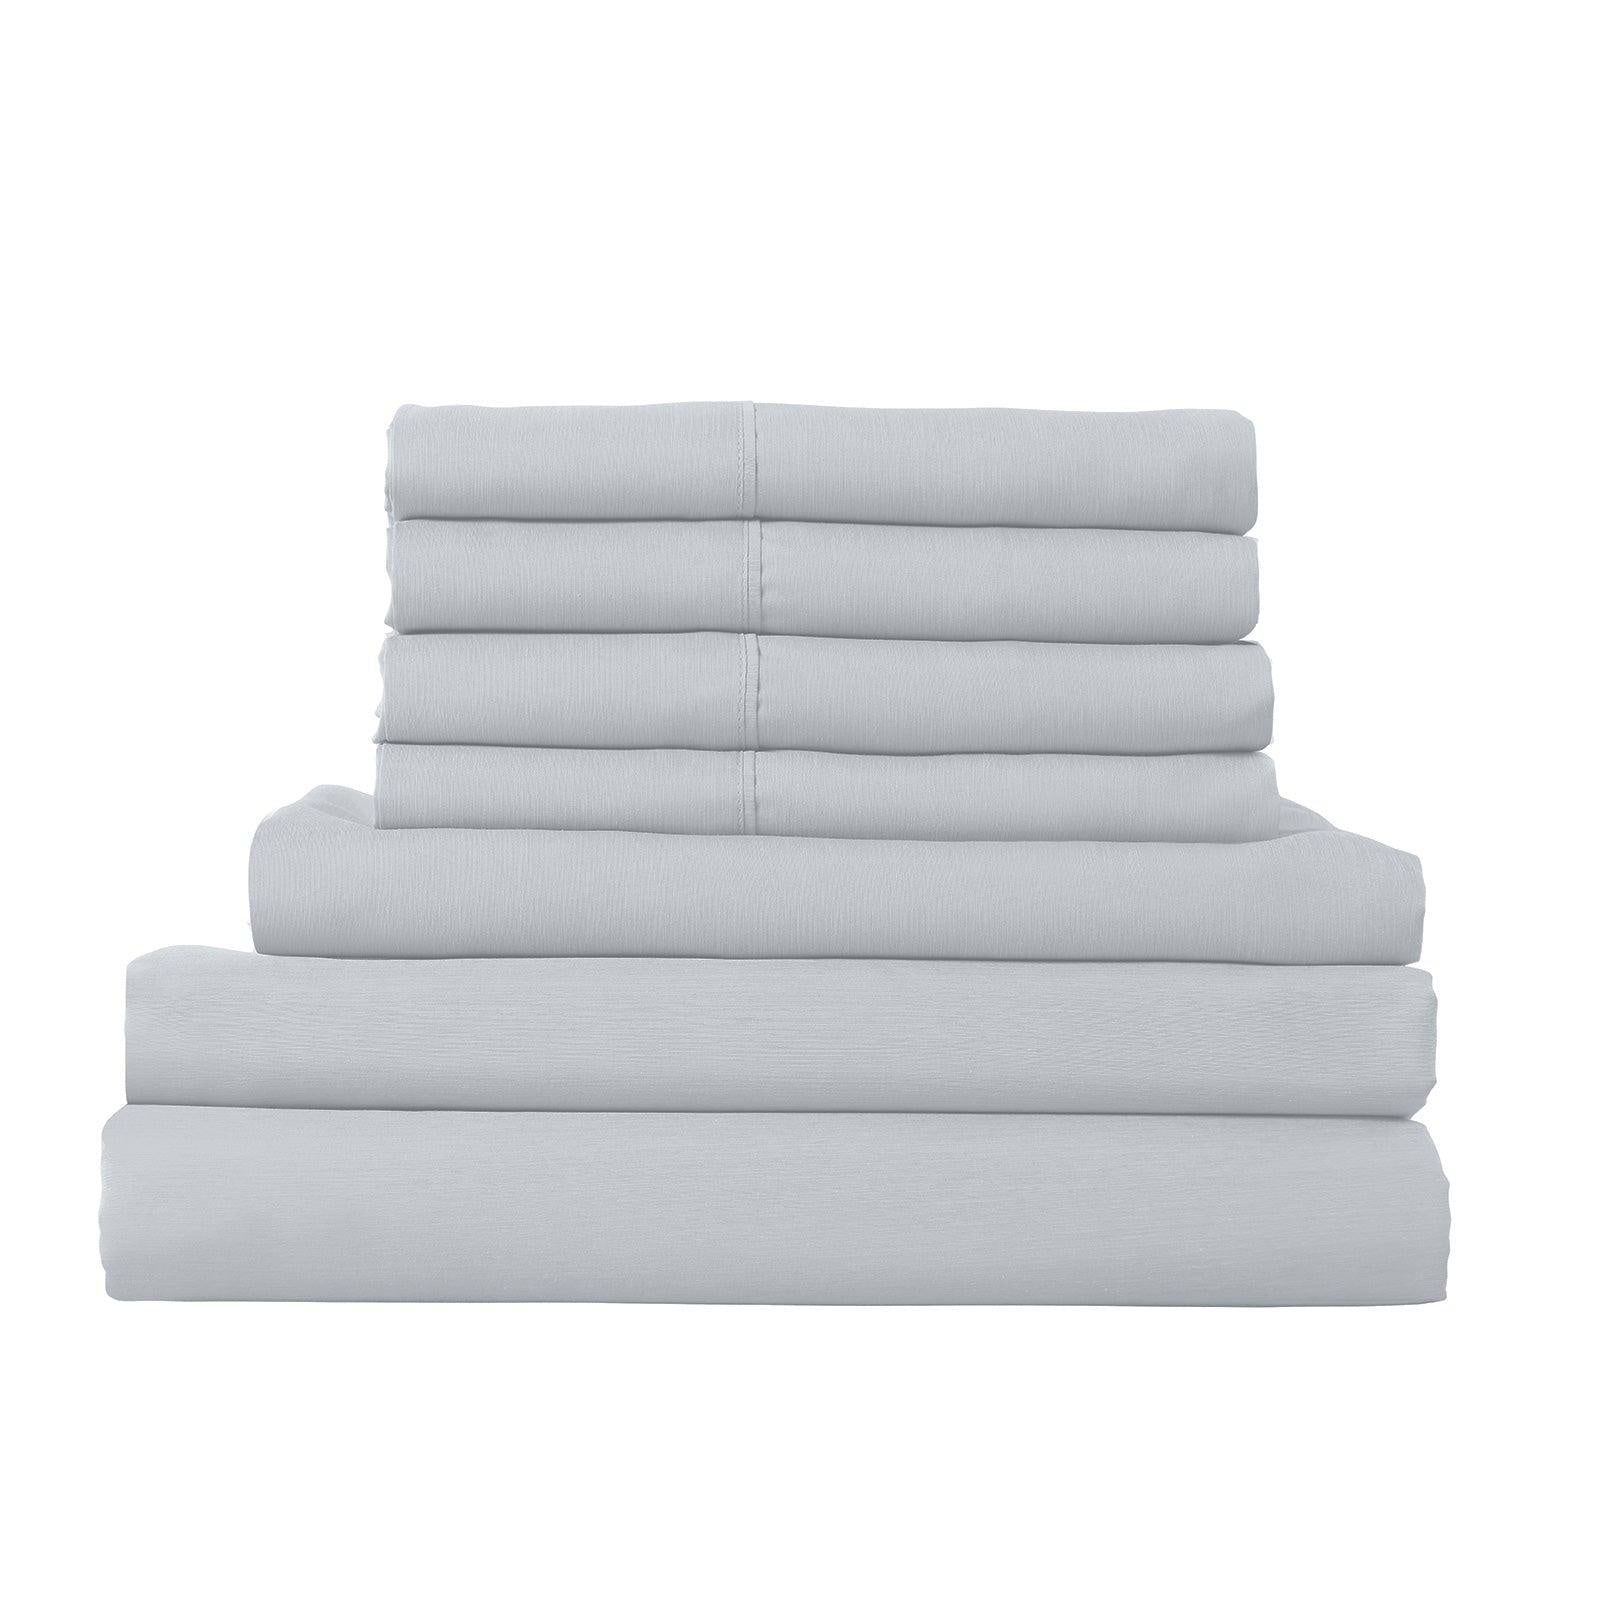 1500 Thread Count 6 Piece Combo And 2 Pack Duck Feather Down Pillows Bedding Set Indigo Queen Deals499